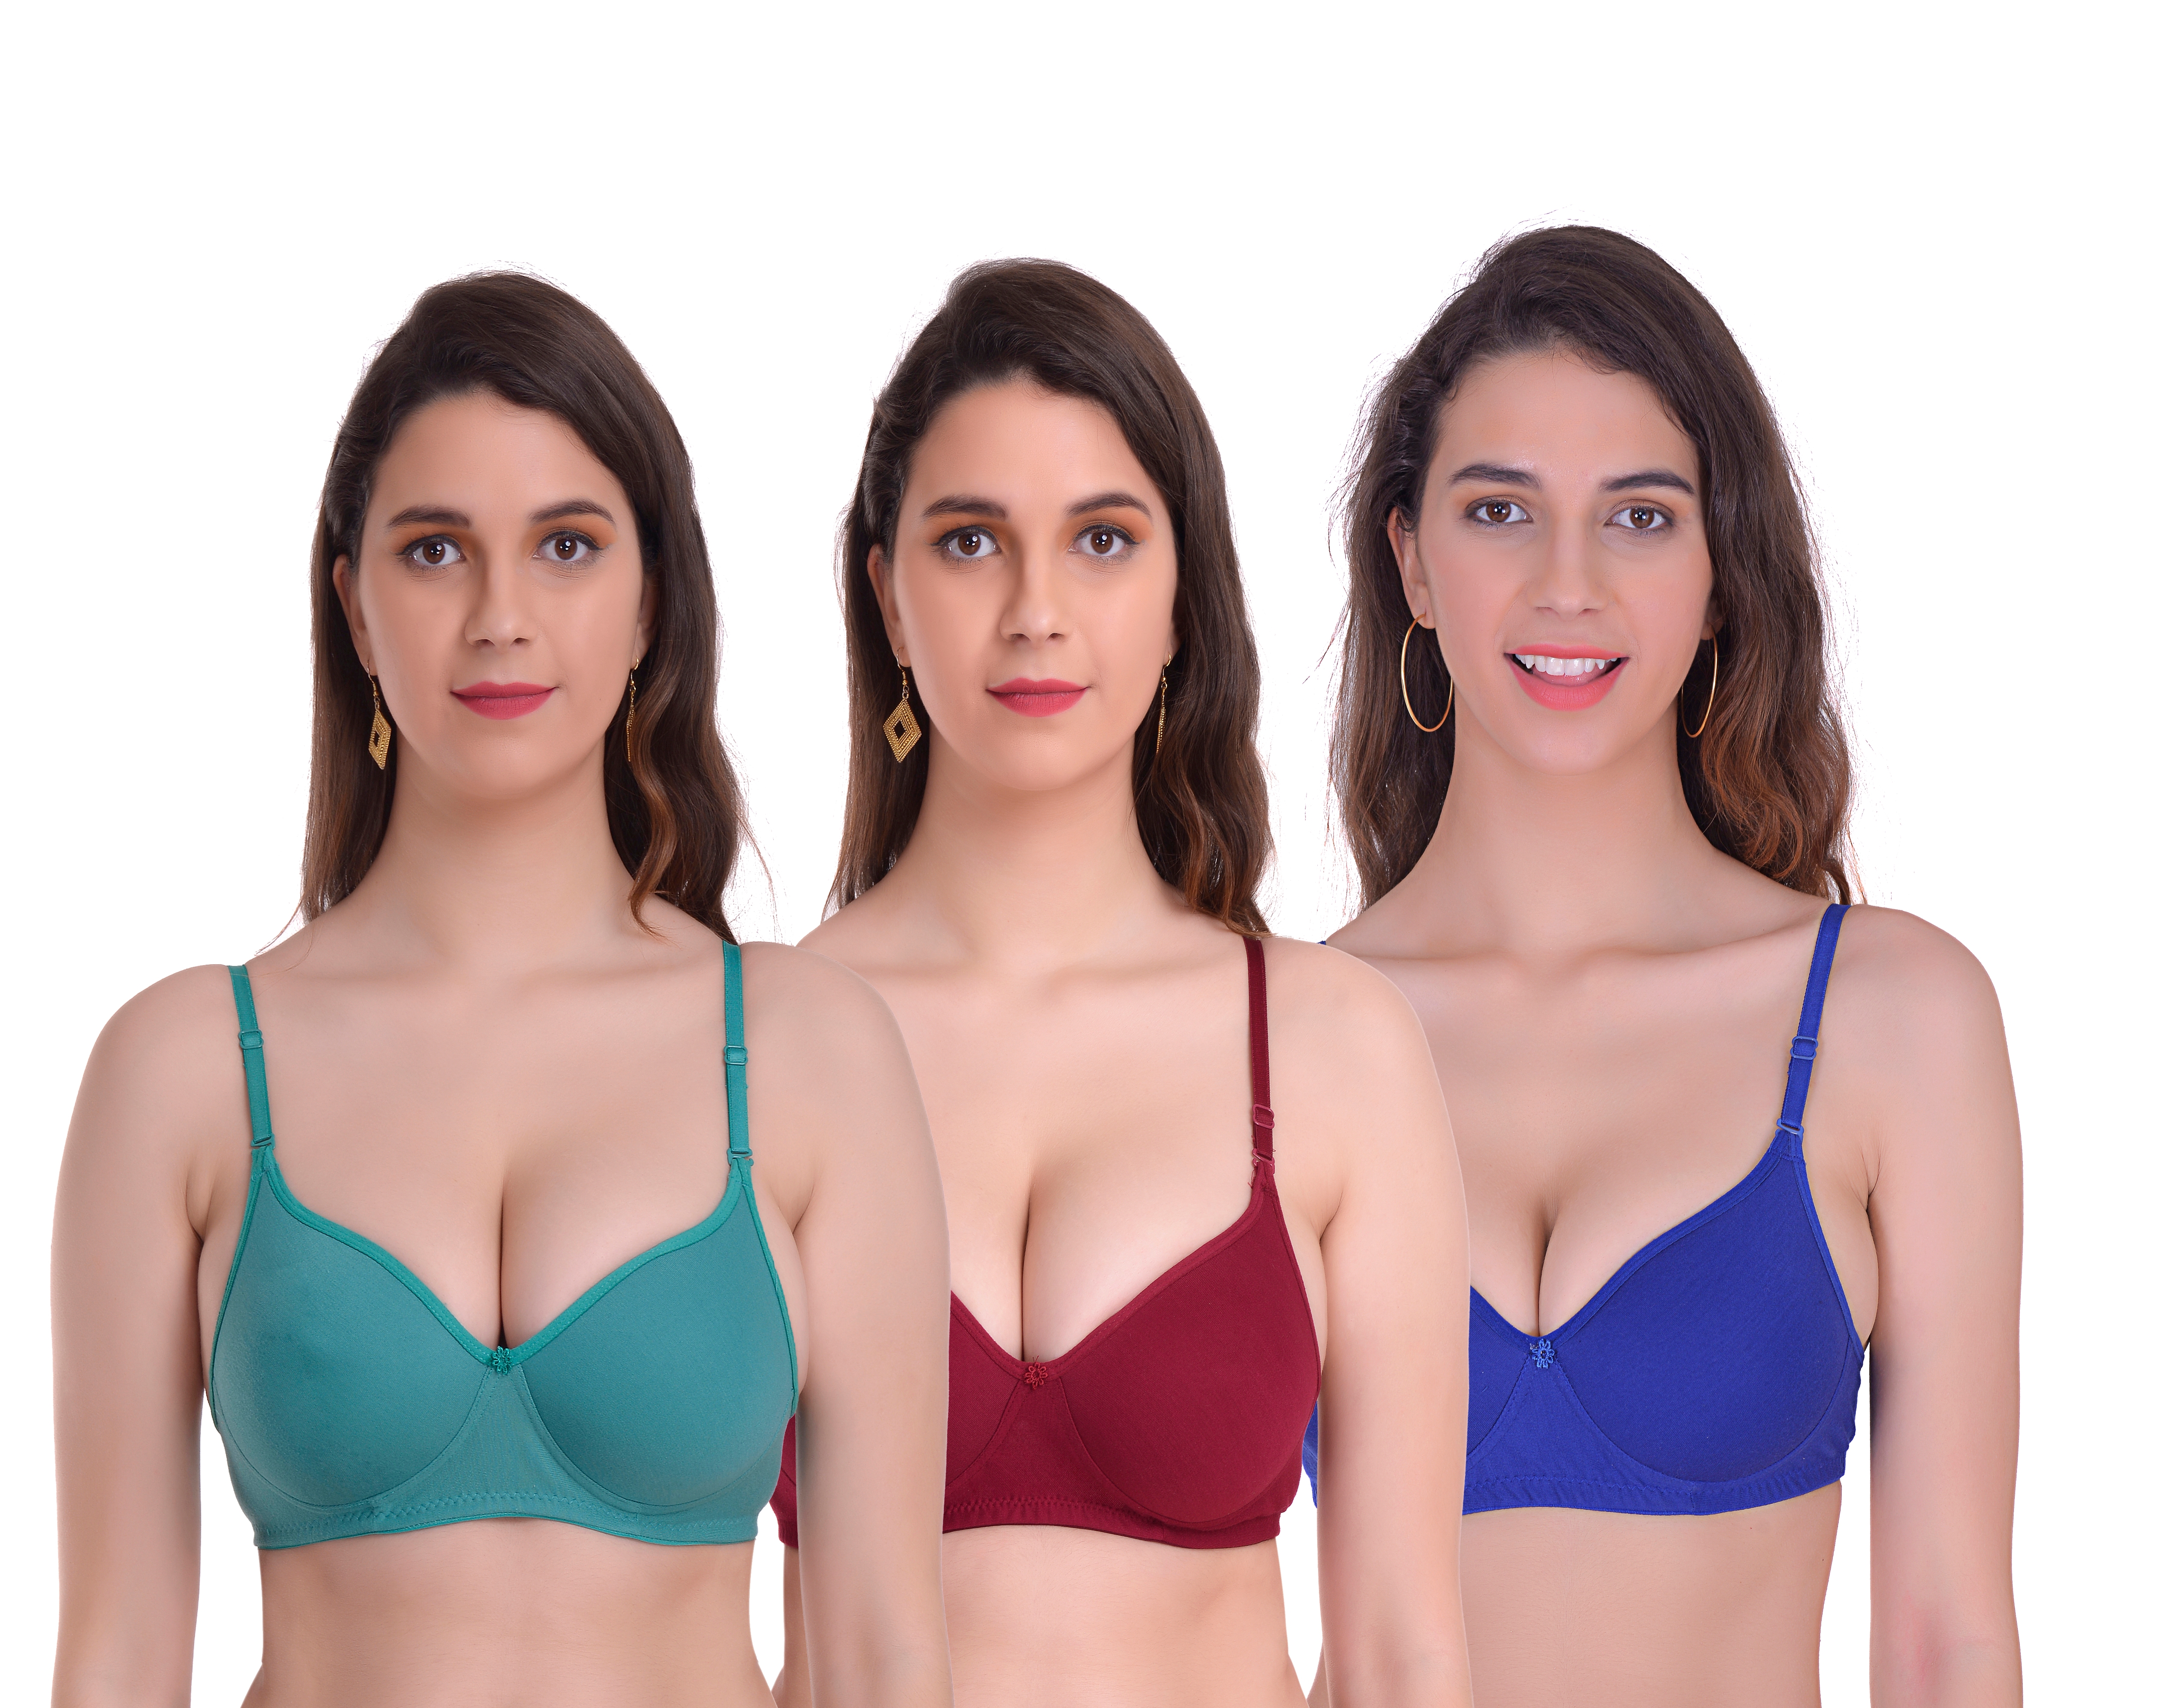 Mynte Women's Cotton Rich Lightly Padded Non-Wired Full Cup Regular Bra (Pack of 3) (Green/Maroon/Blue,30) (MY-CPPB-7GMBL-30)